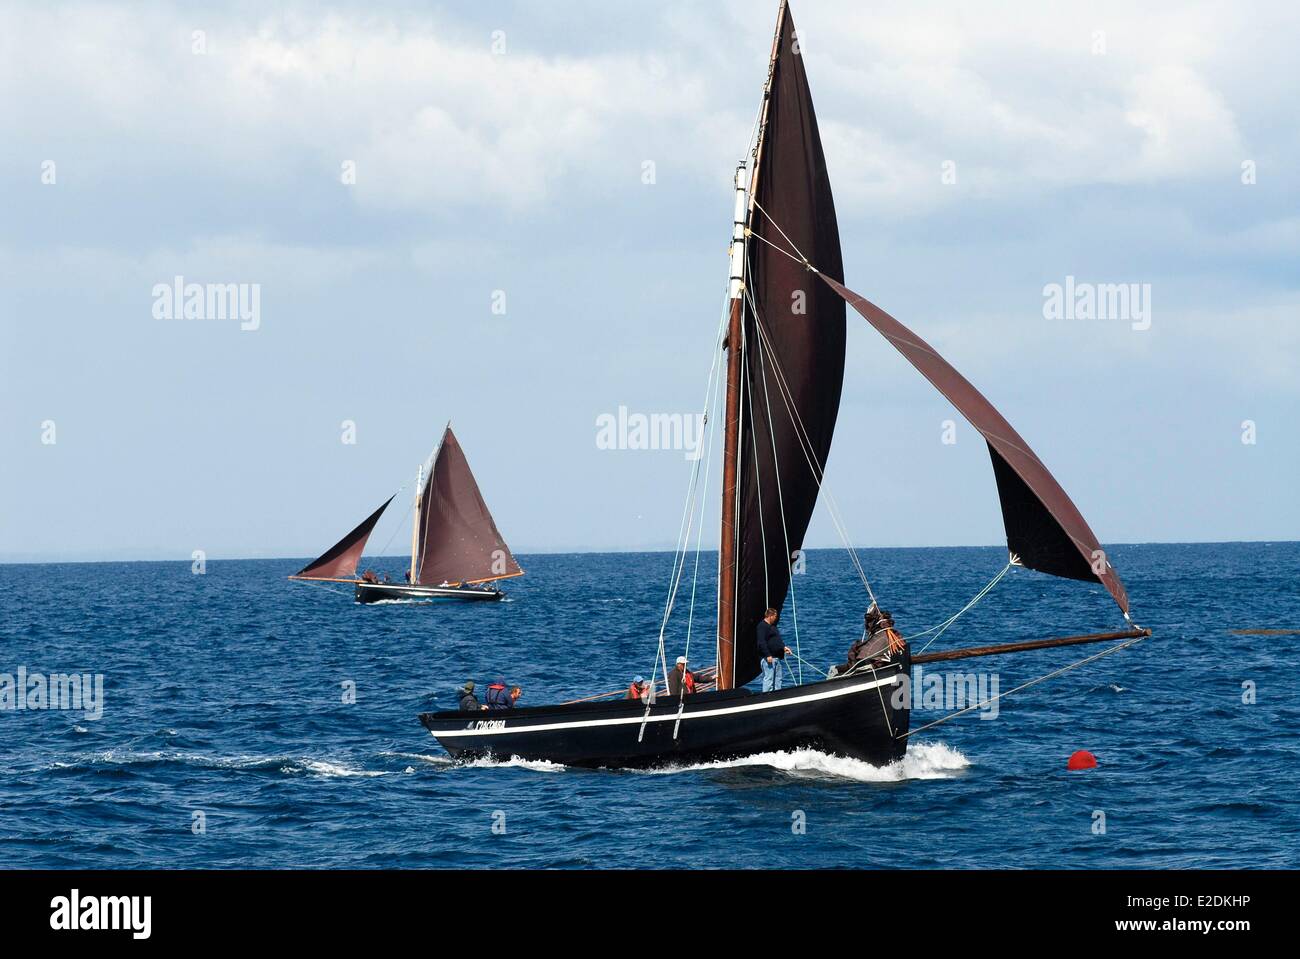 Ireland County Galway Aran Islands Inisheer traditional wooden sailing boat of Galway Bay Galway hooker Stock Photo